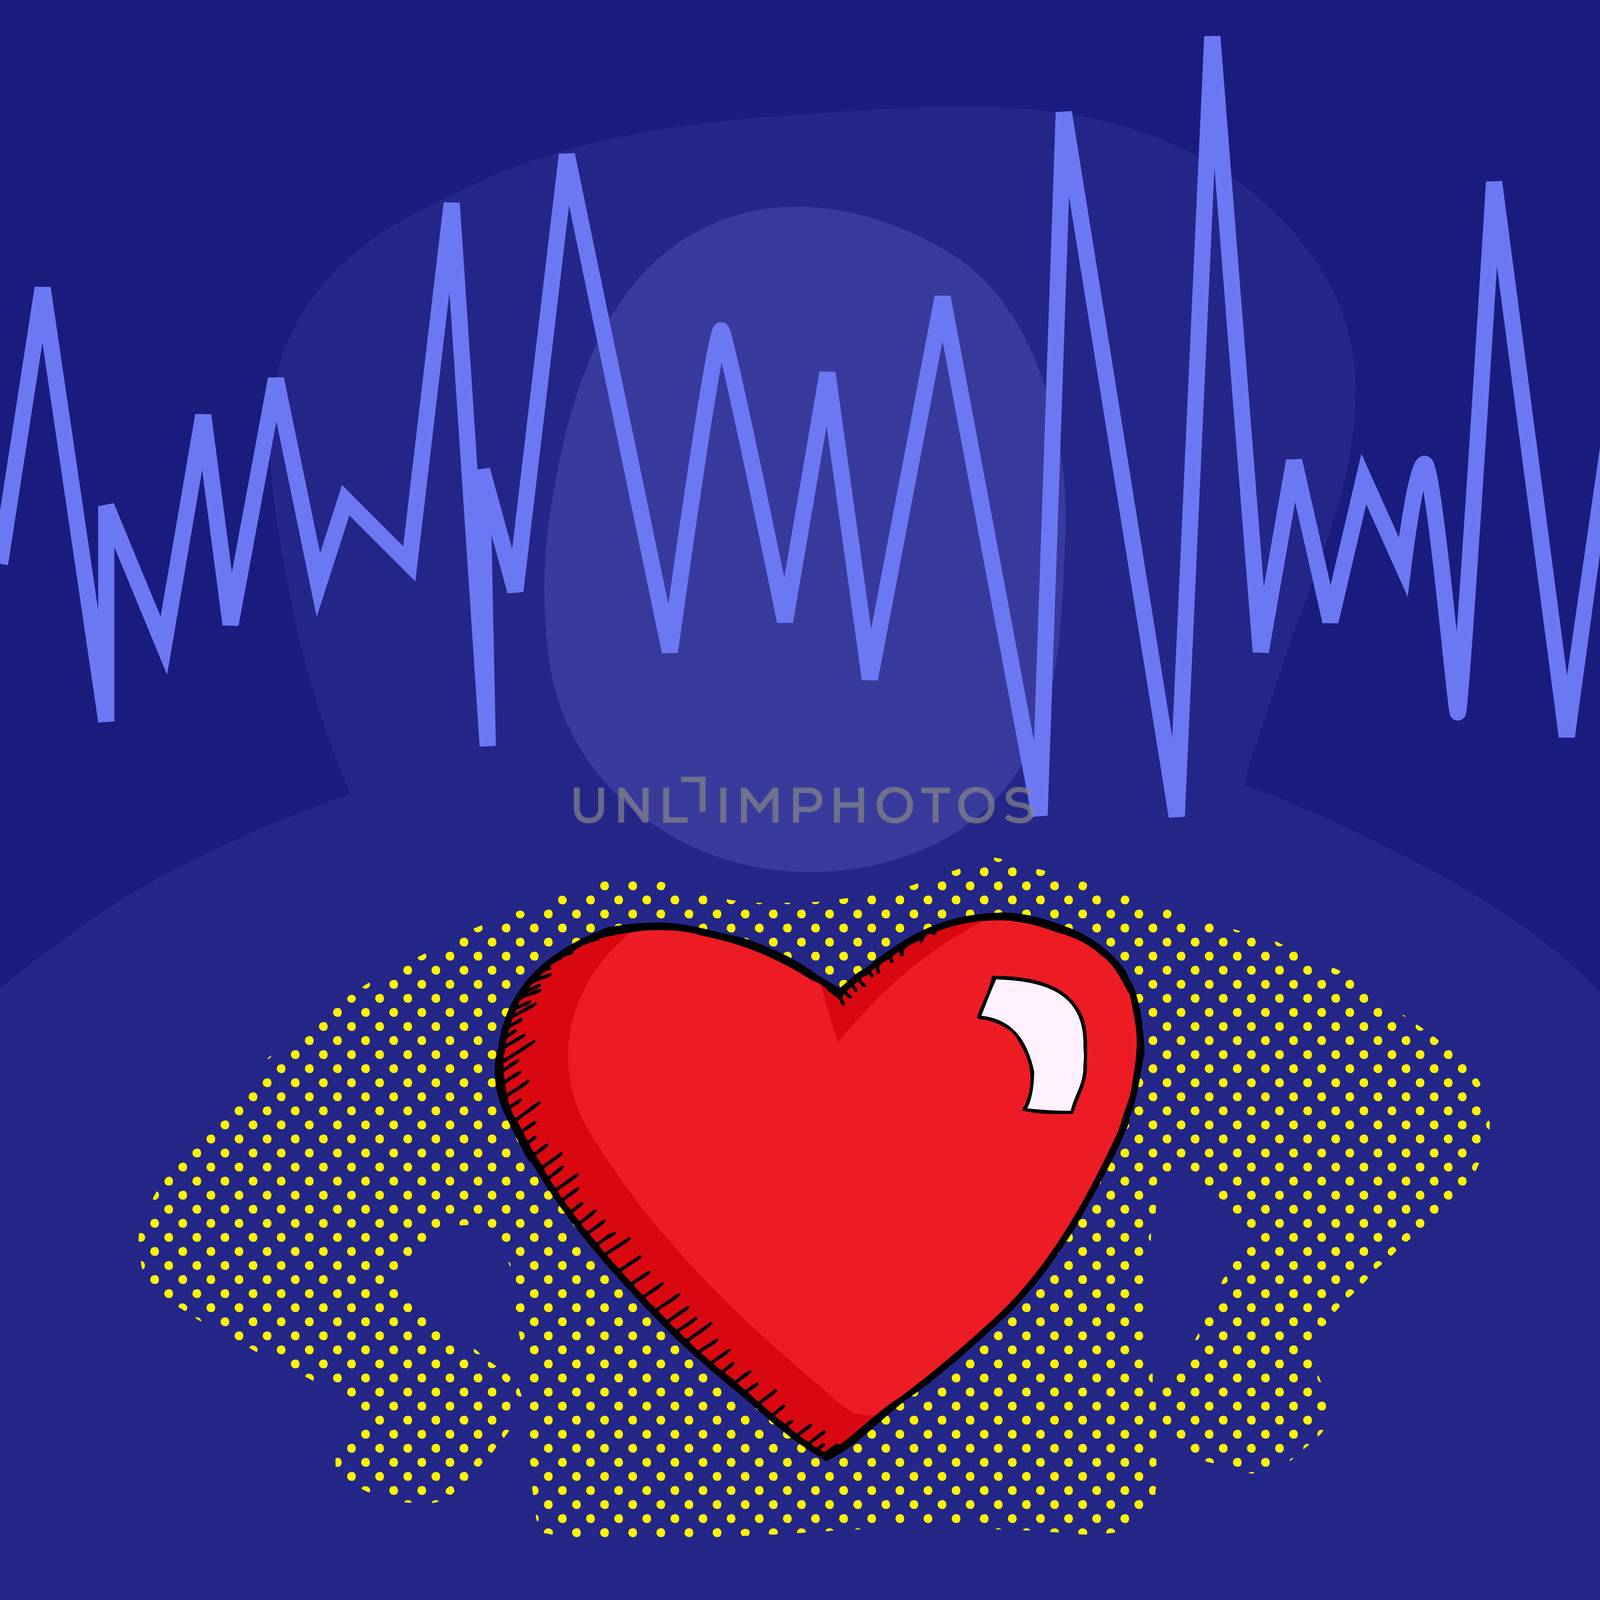 Cardiogram and Heart Graphic by TheBlackRhino